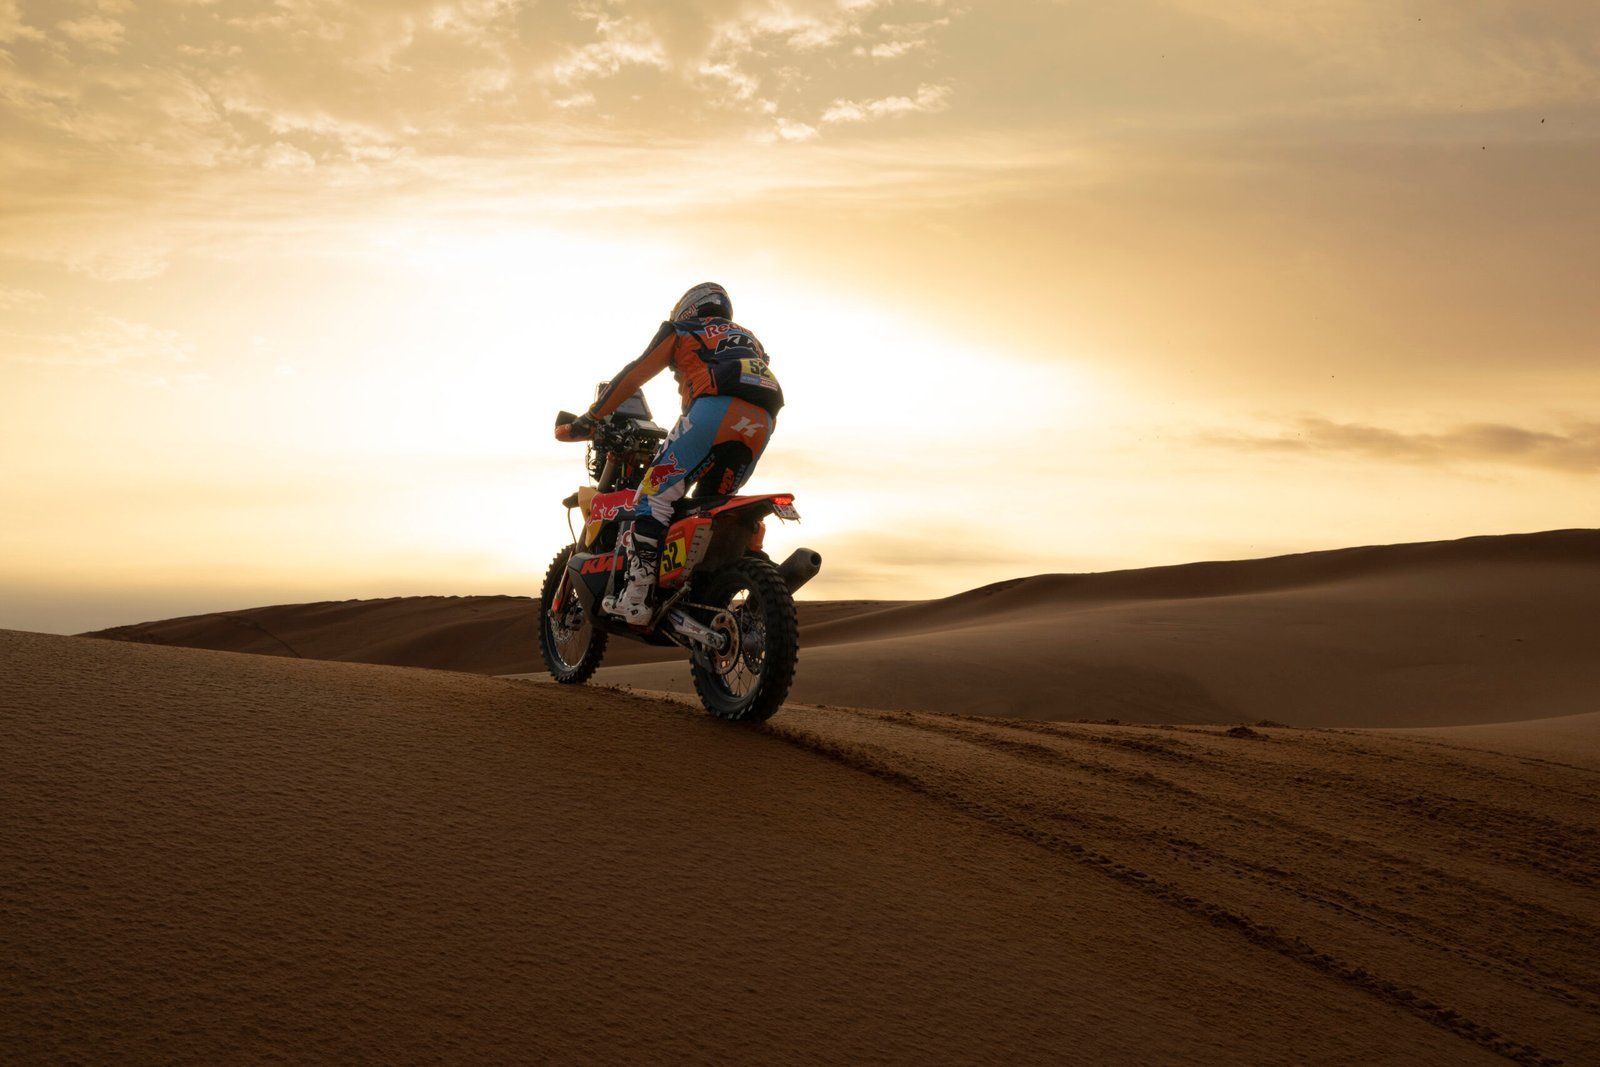 KEVIN BENAVIDES LEADS THE DAKAR RALLY AFTER STAGE 10 © Copyright PLPG GLOBAL MEDIA 2023